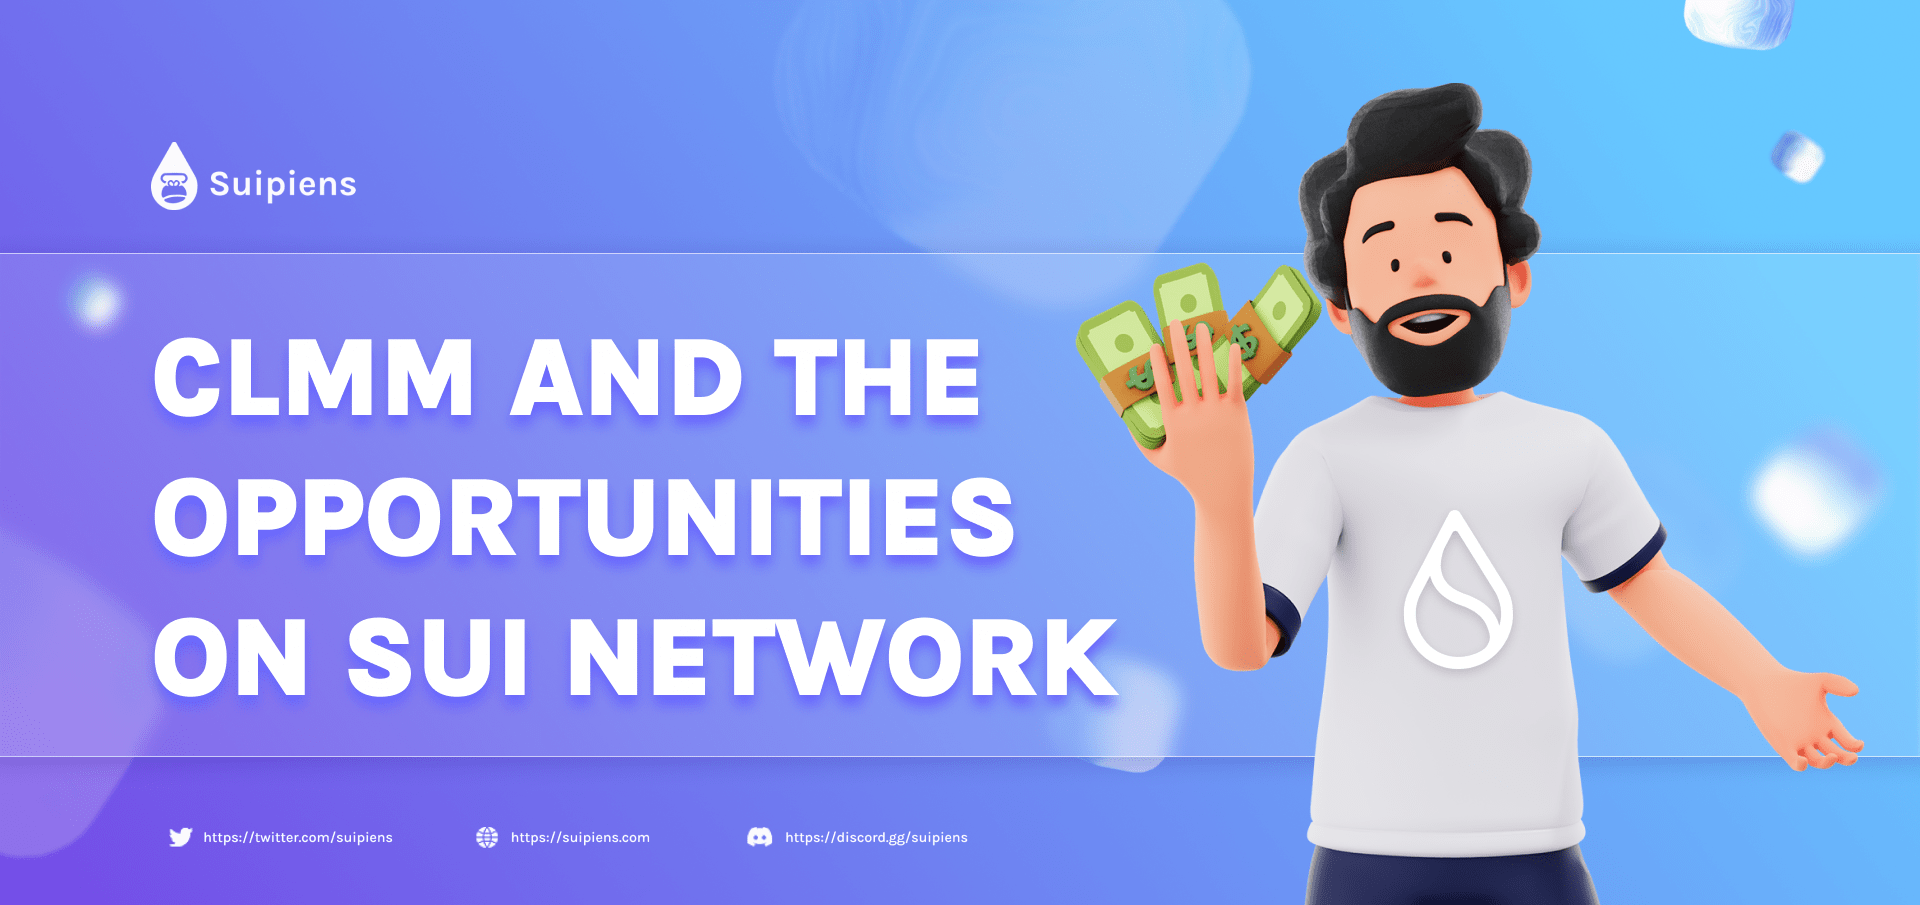 CLMM and the Opportunities on Sui Network